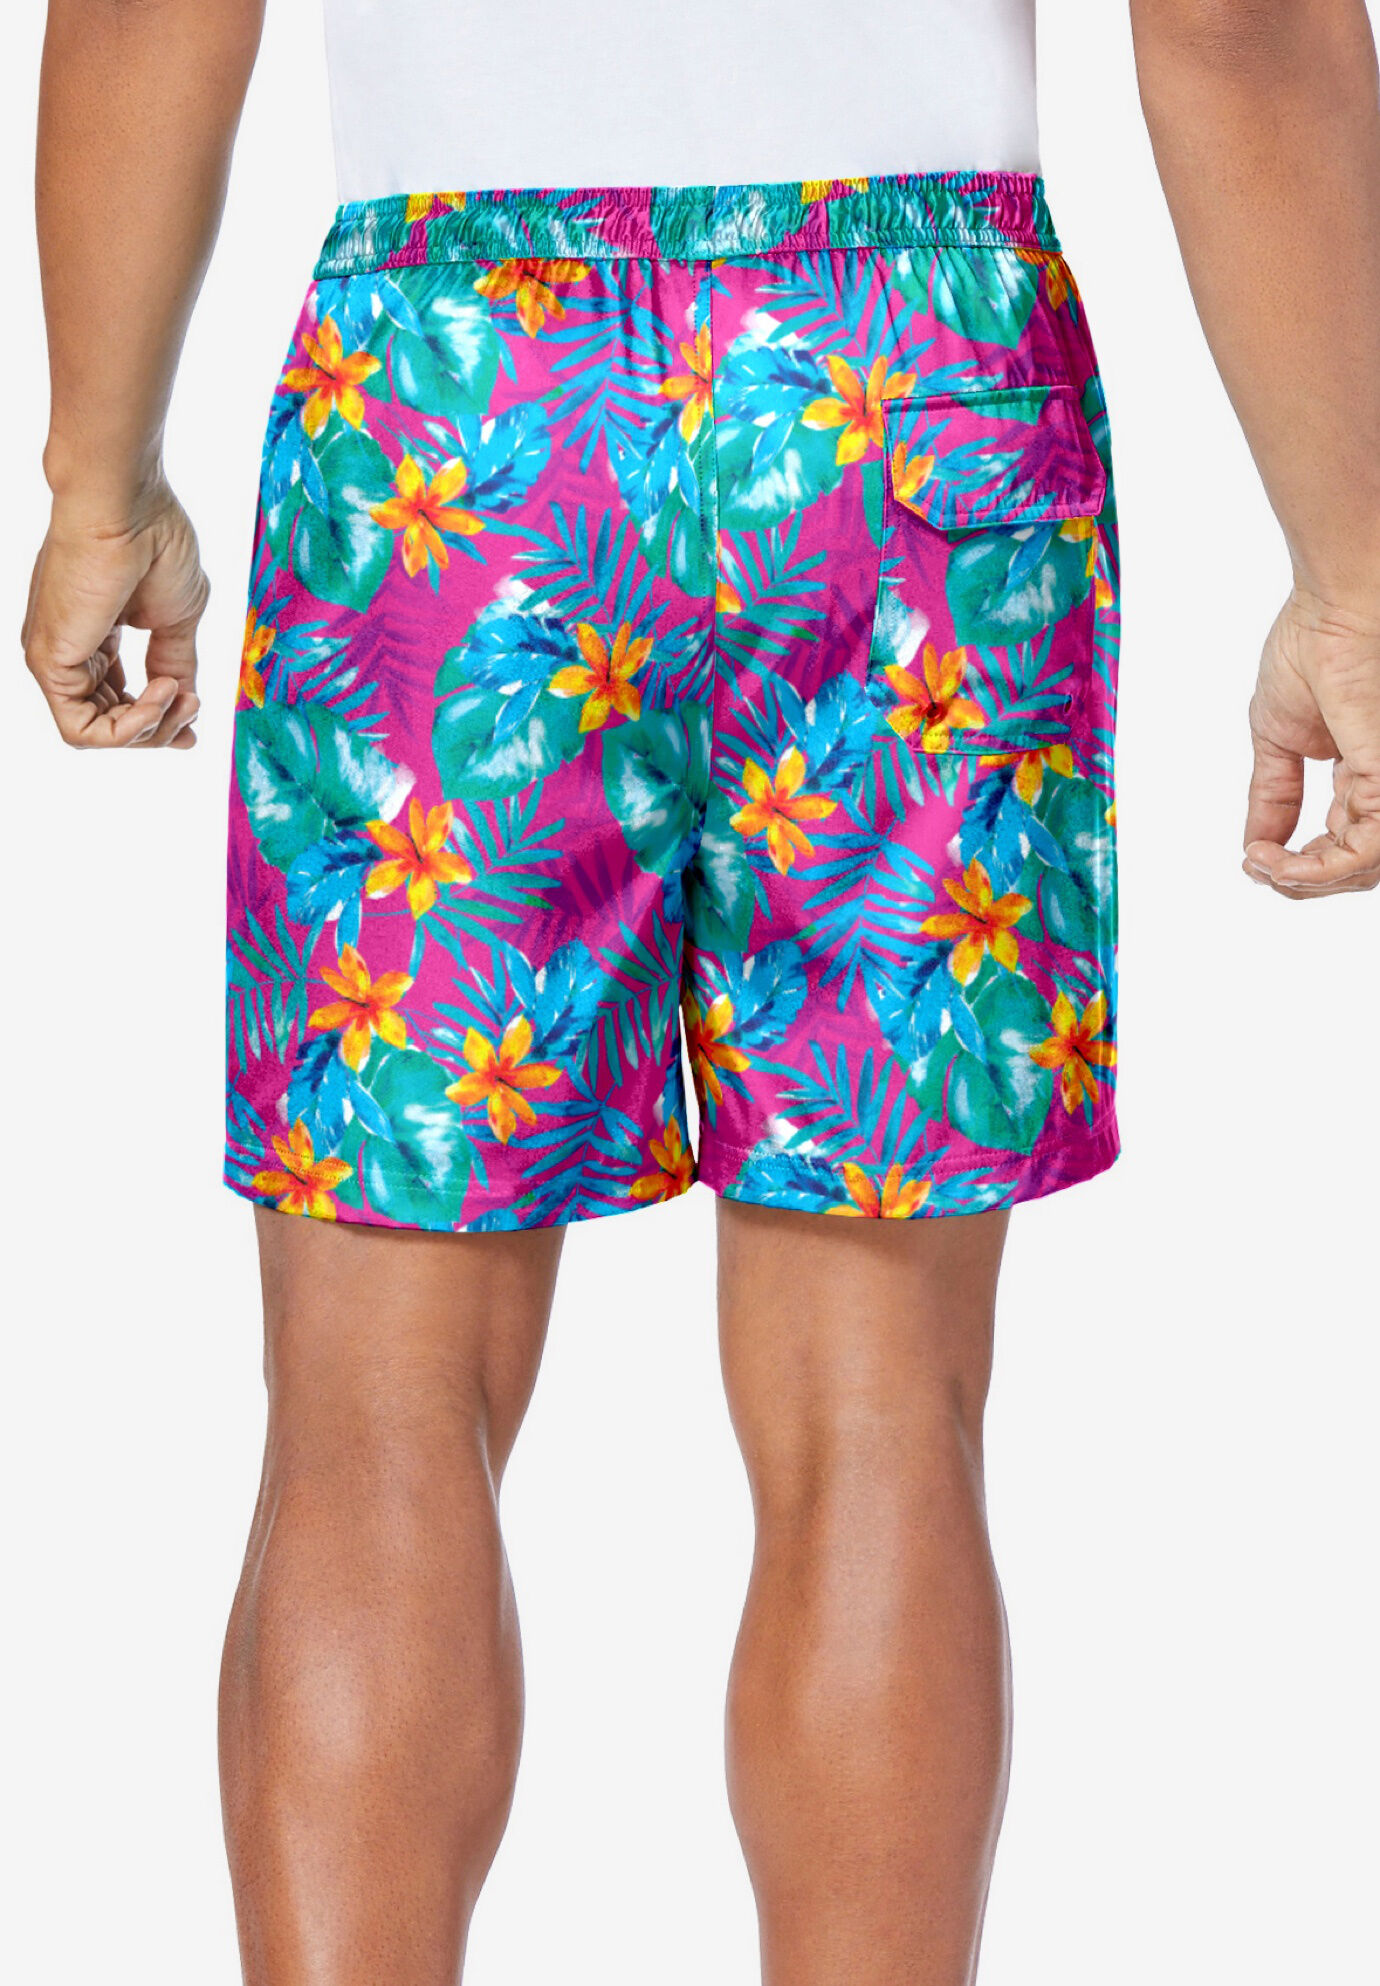 Men's Big & Tall 5 Flex Swim Trunks with Breathable Stretch Liner by Meekos in Hula Palm (Size 4XL)